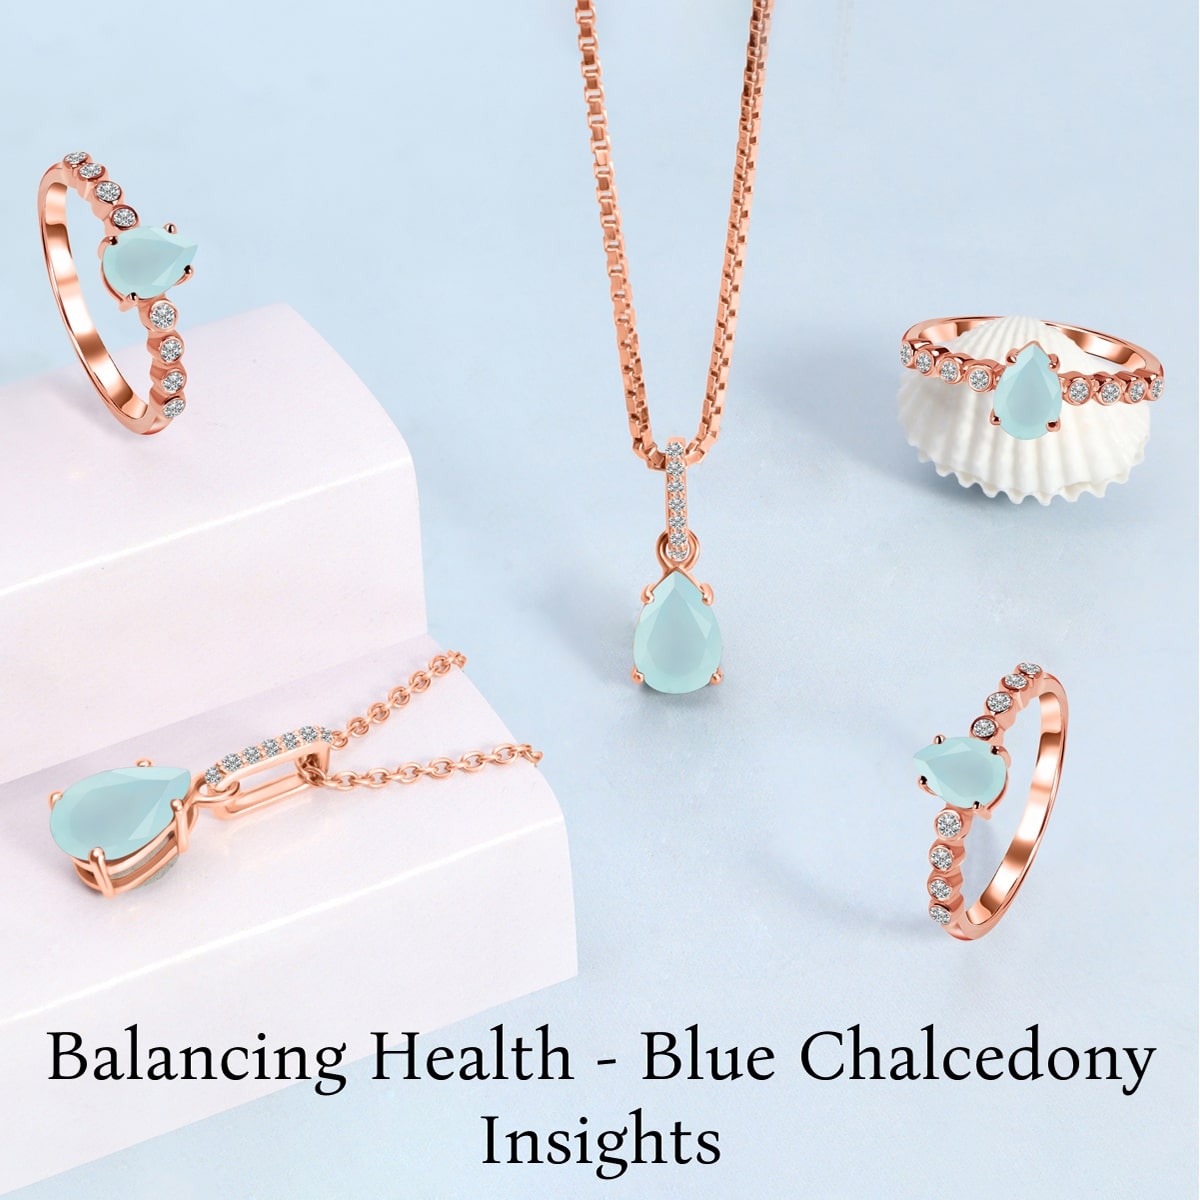 The Healing Symphony: Blue Chalcedony and Physical Well-being